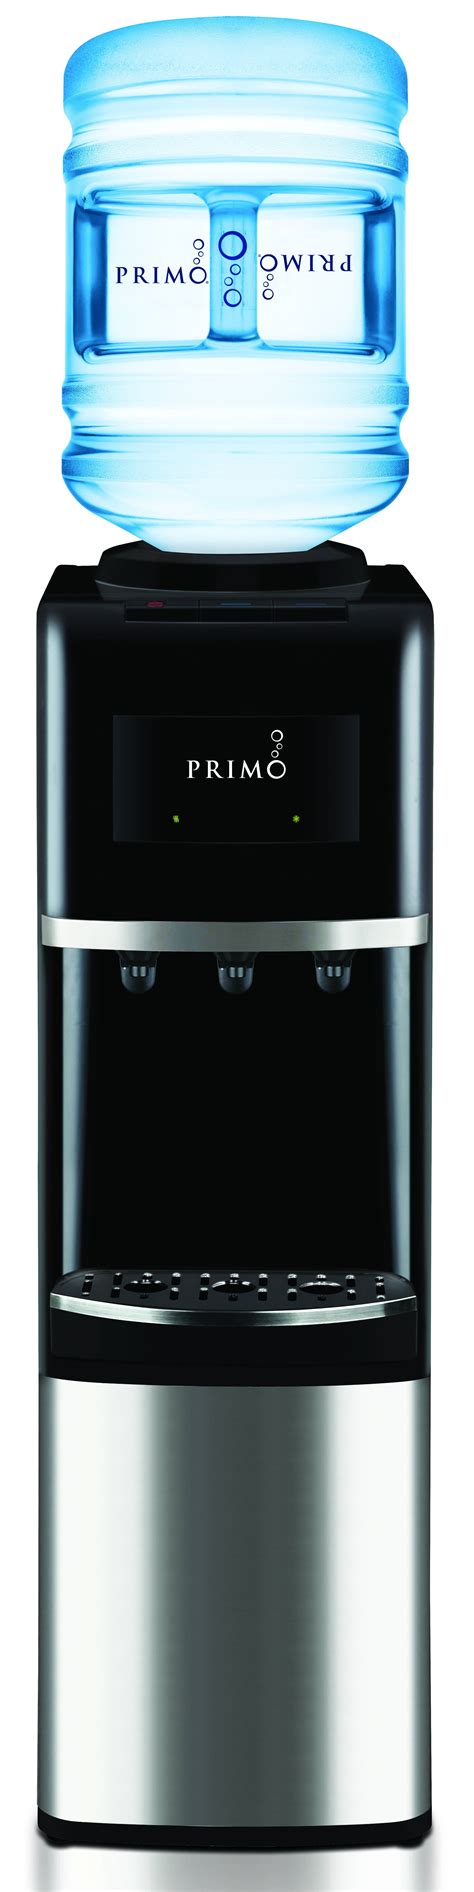 Primo Water Dispenser Top Loading Cooler Hot Gallon Bottle Stainless Electric EBay